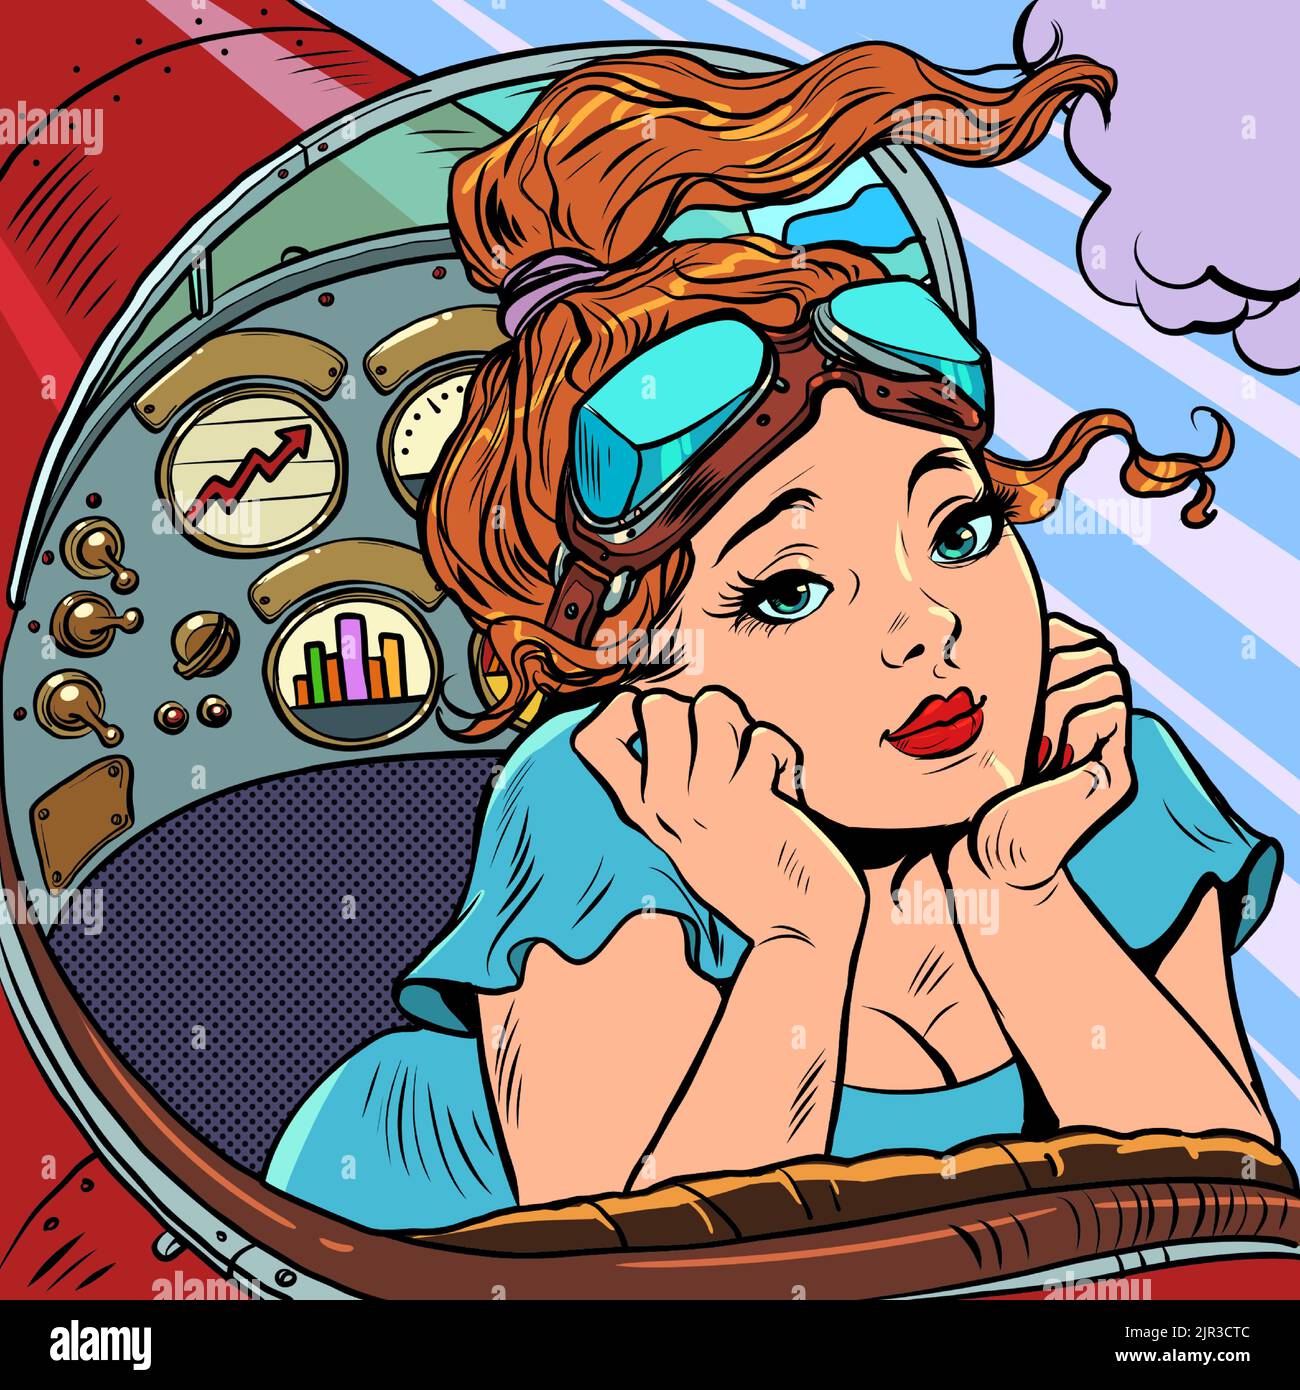 cockpit of a retro aircraft, the woman pilot leads the airplane. Pilot profession. Pop art retro vector illustration 50s 60s style kitsch vintage Stock Vector